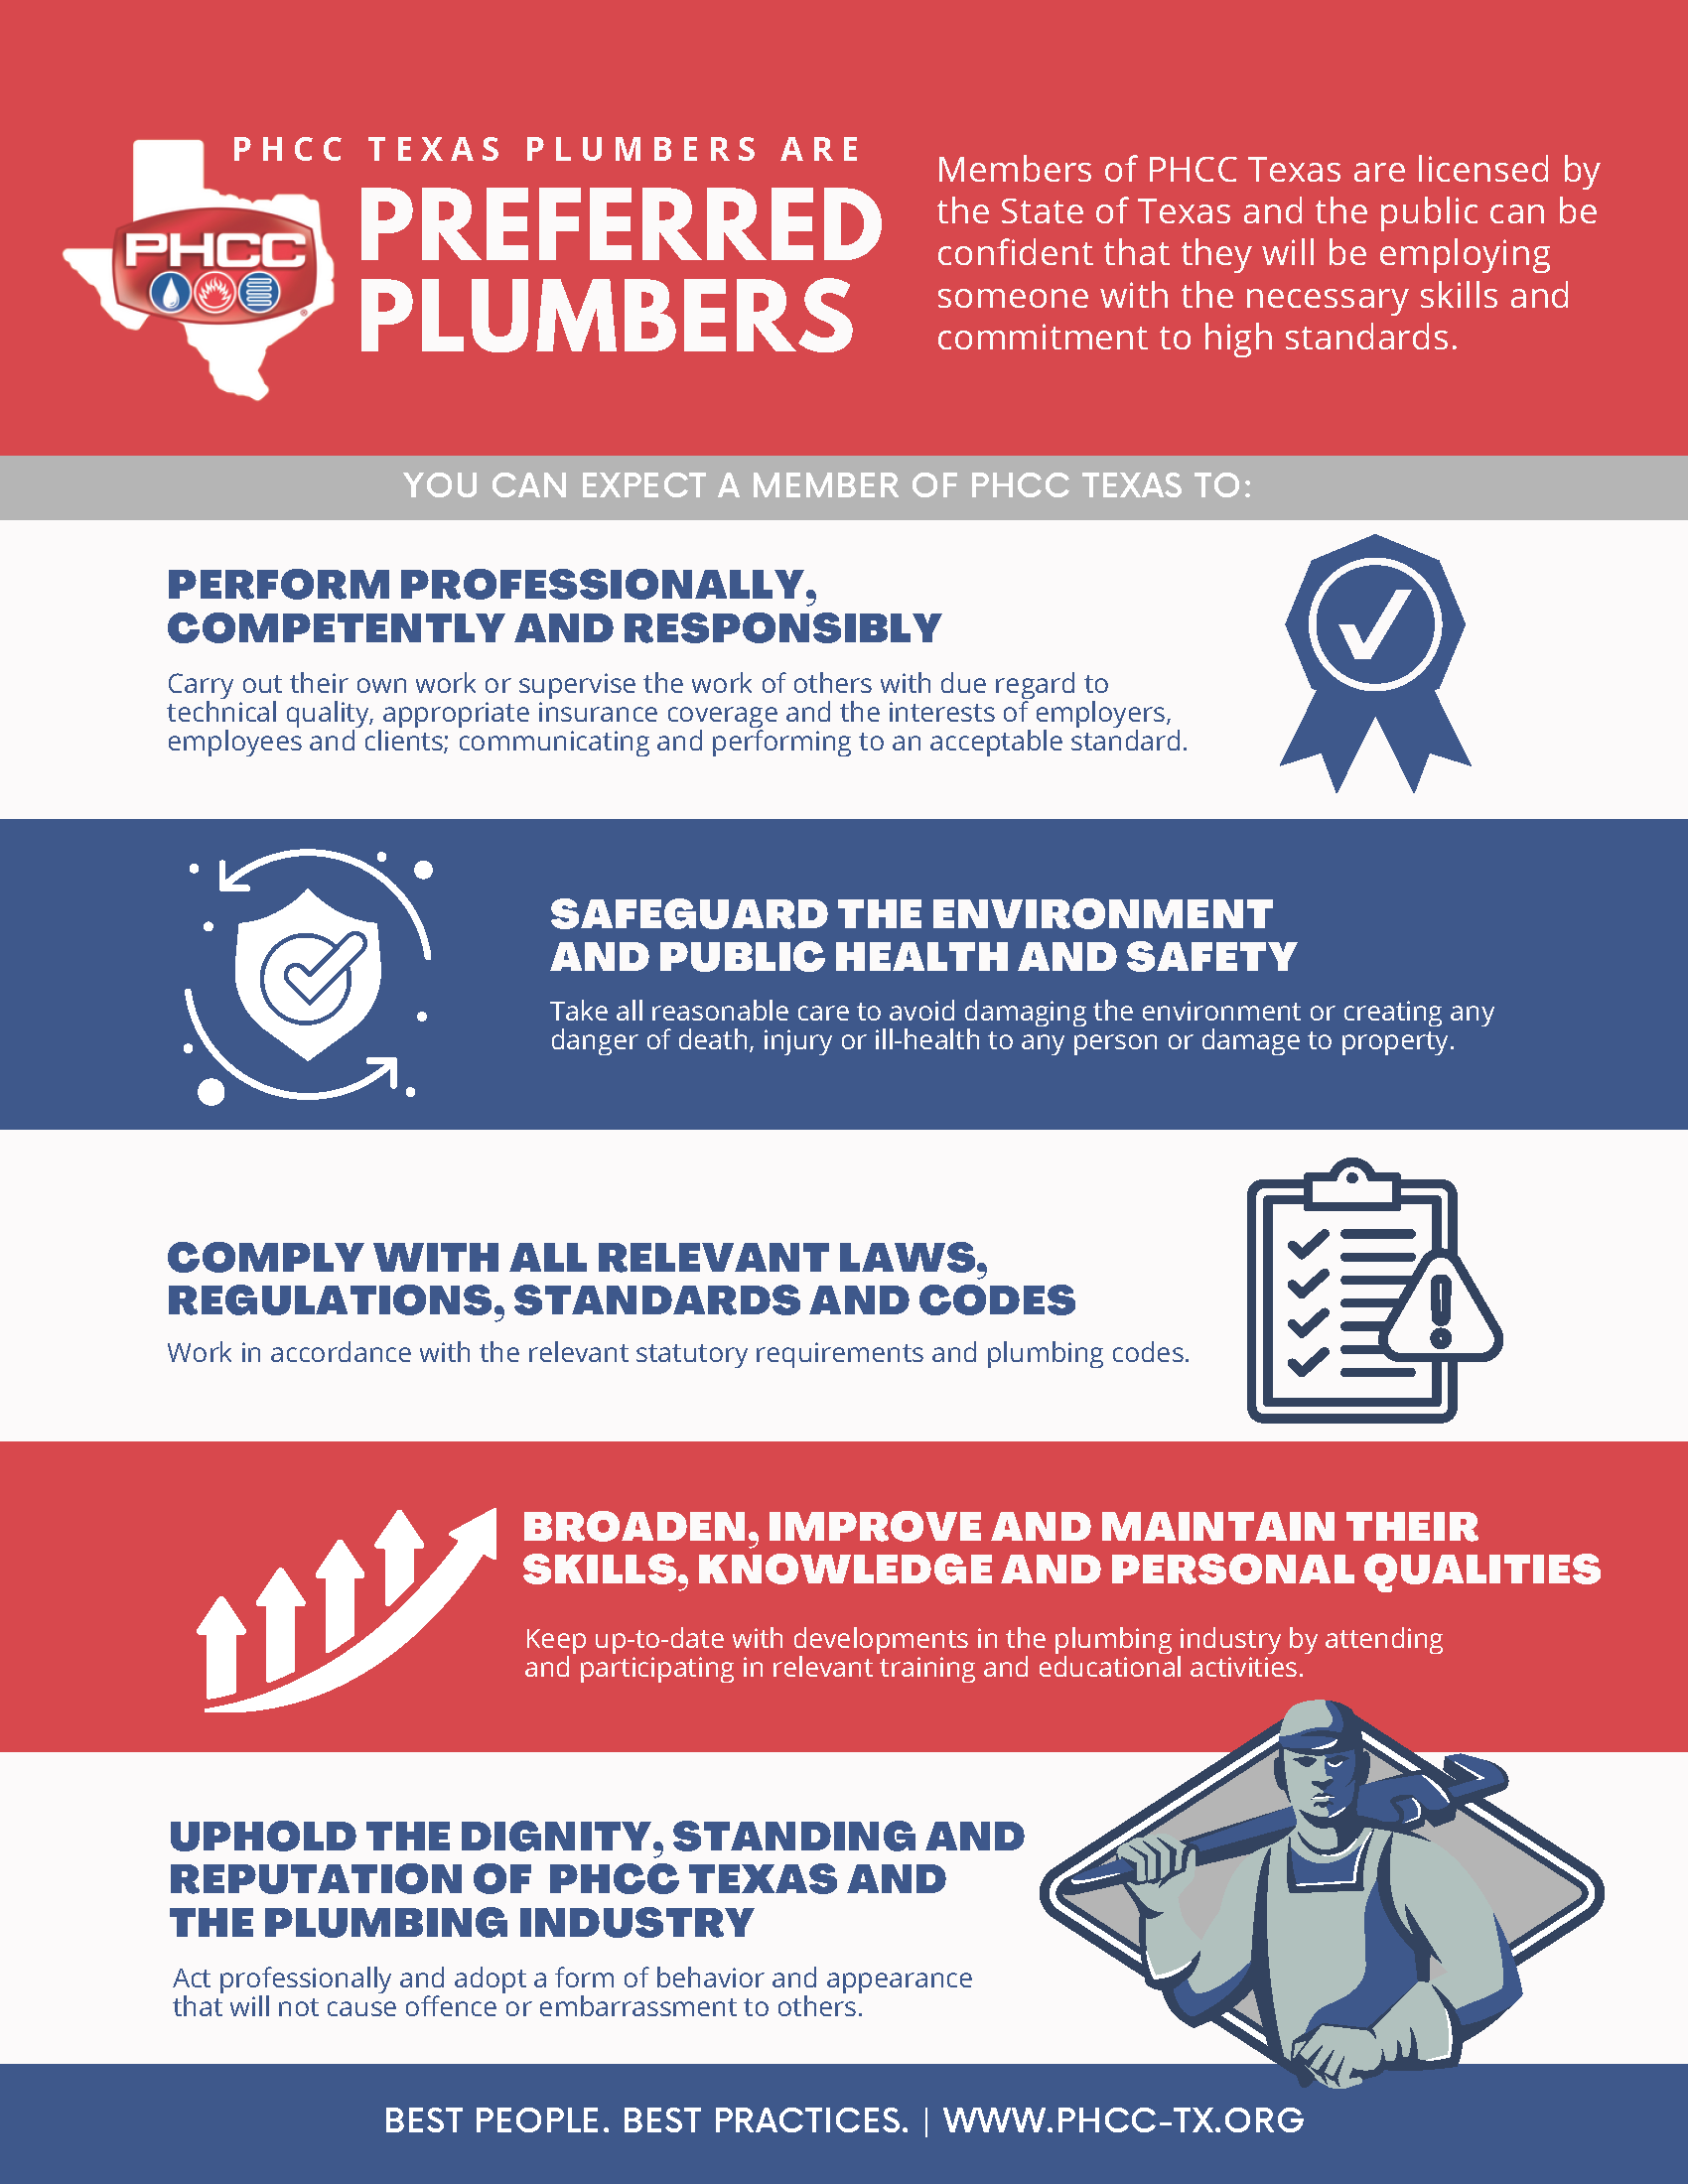 How to Maintain Healthy Plumbing